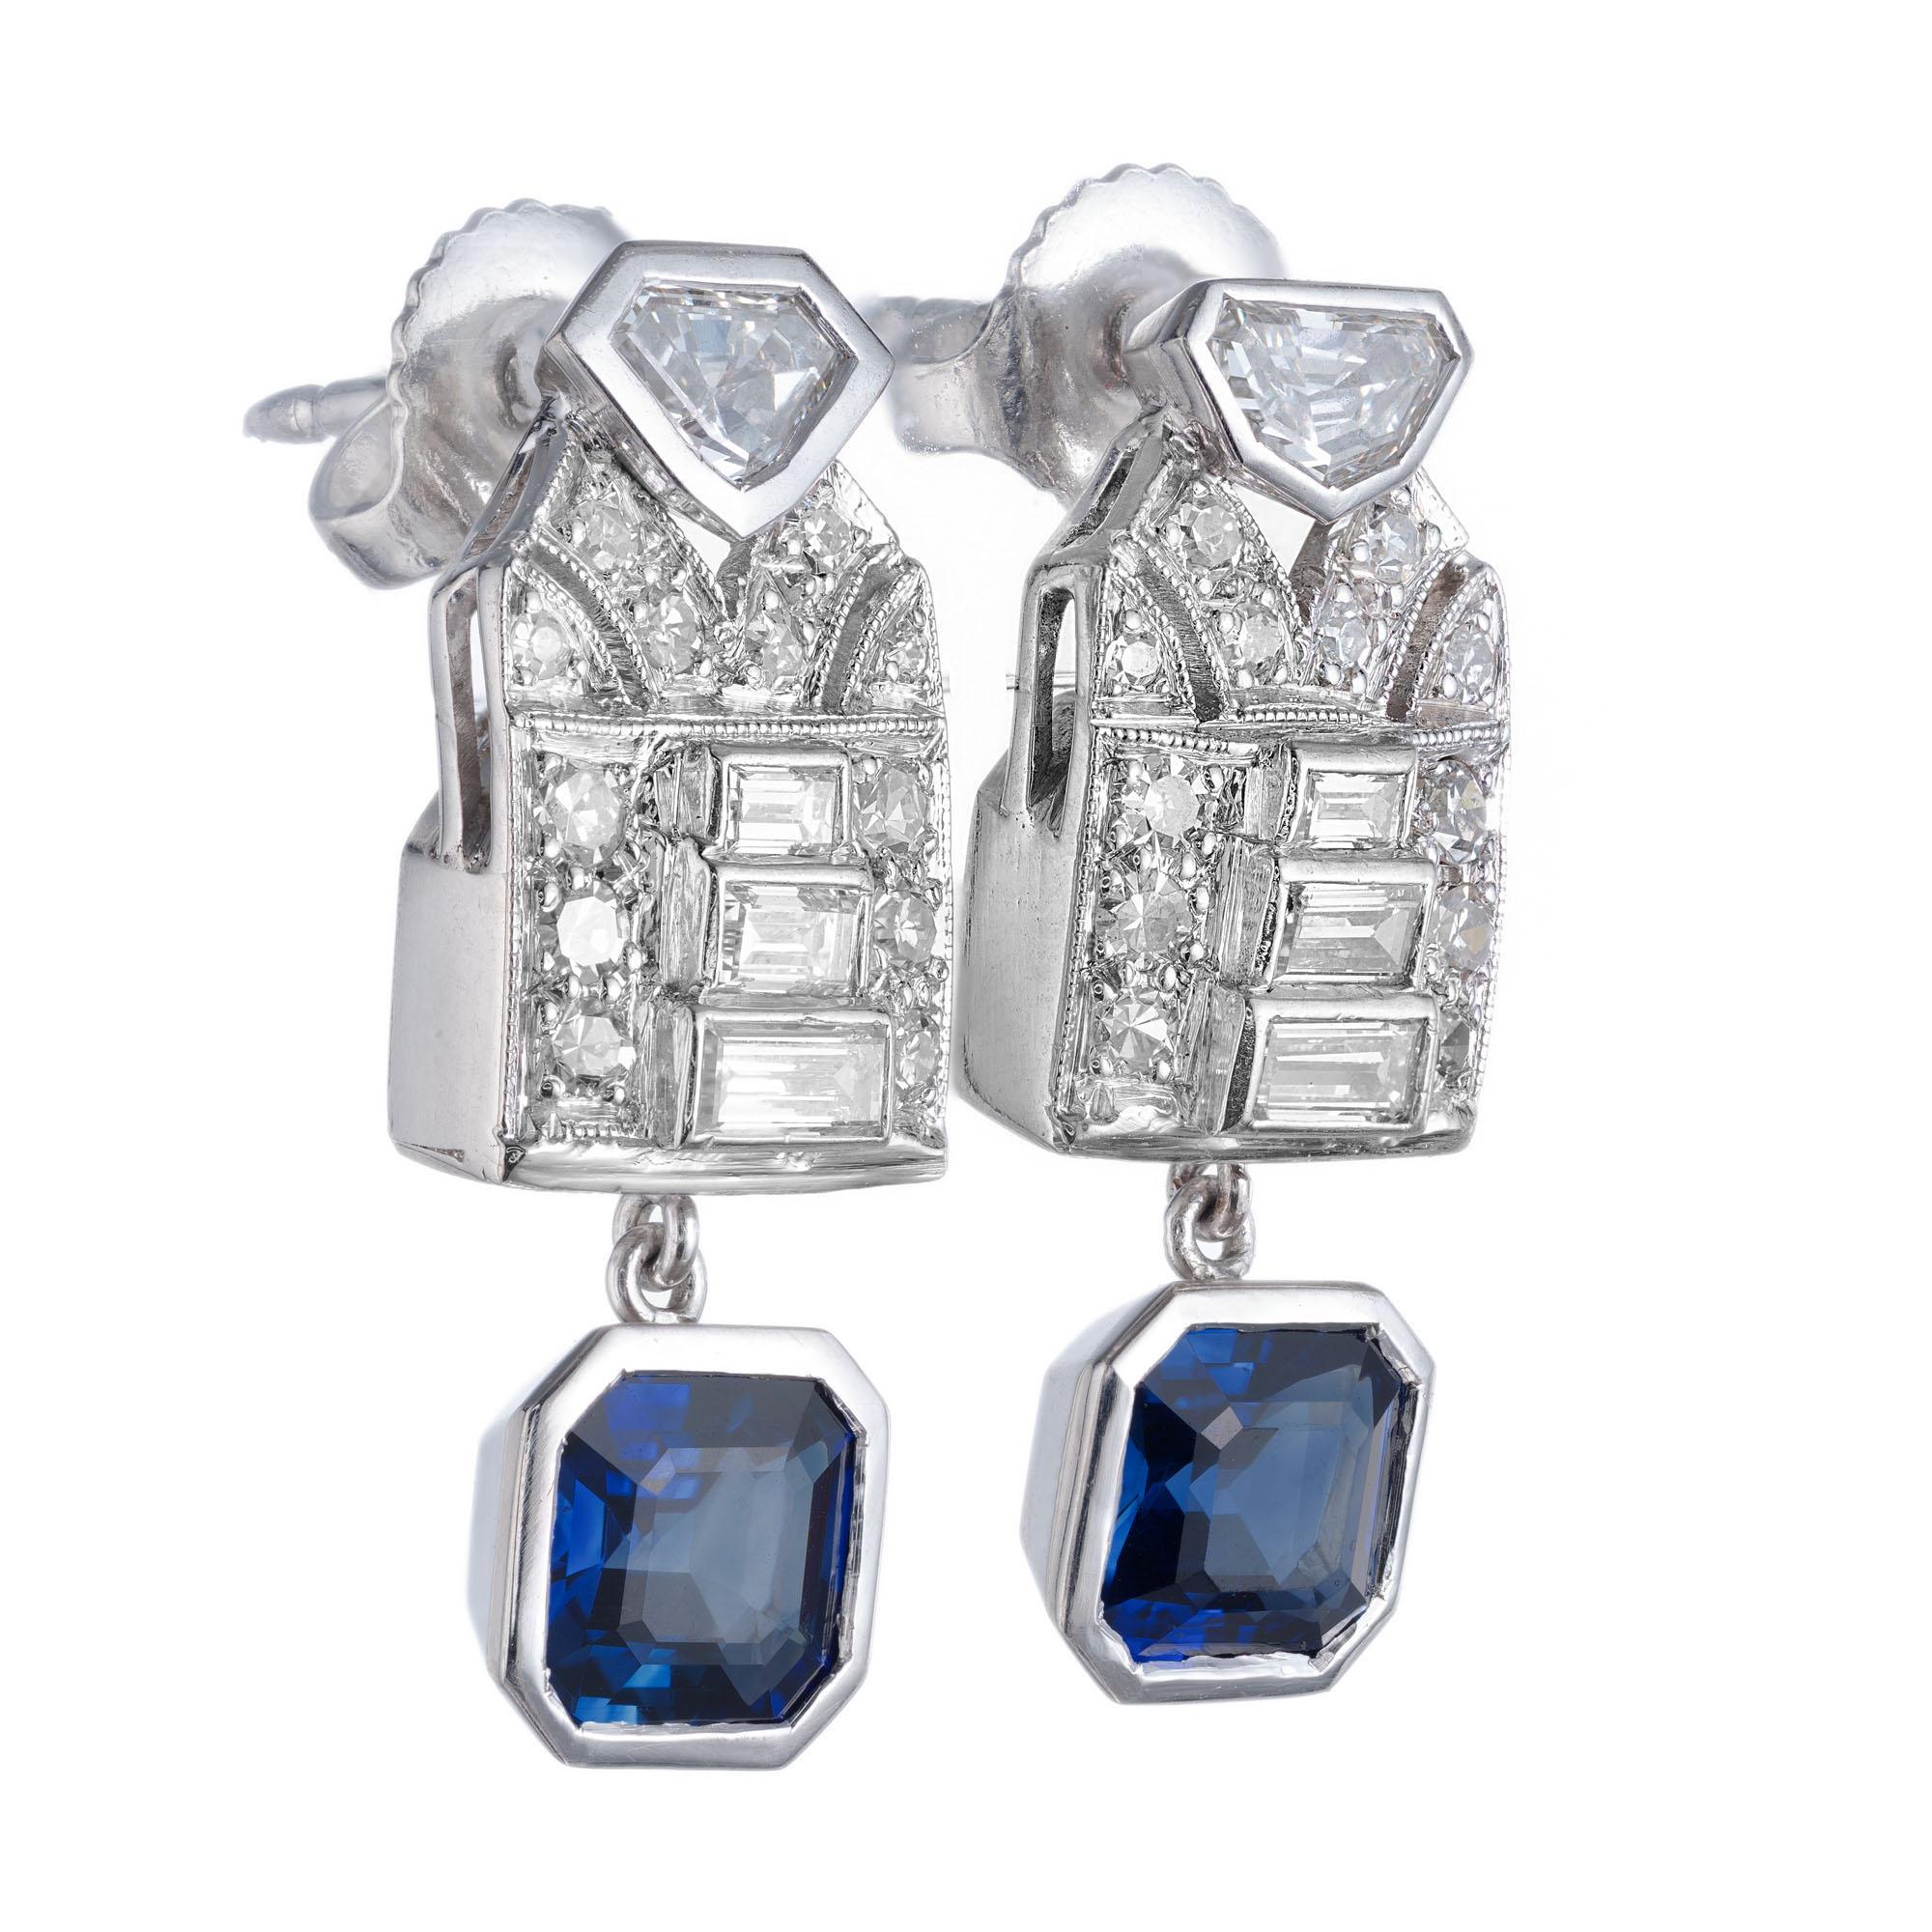 1915 Art Deco sapphire and diamond dangle earrings. Set with shield, baguette and round diamonds in platinum with bezel set blue octagonal step cut sapphire dangles. Both GIA certified natural no heat.

2 octagonal blue sapphires, VS-SI approx.